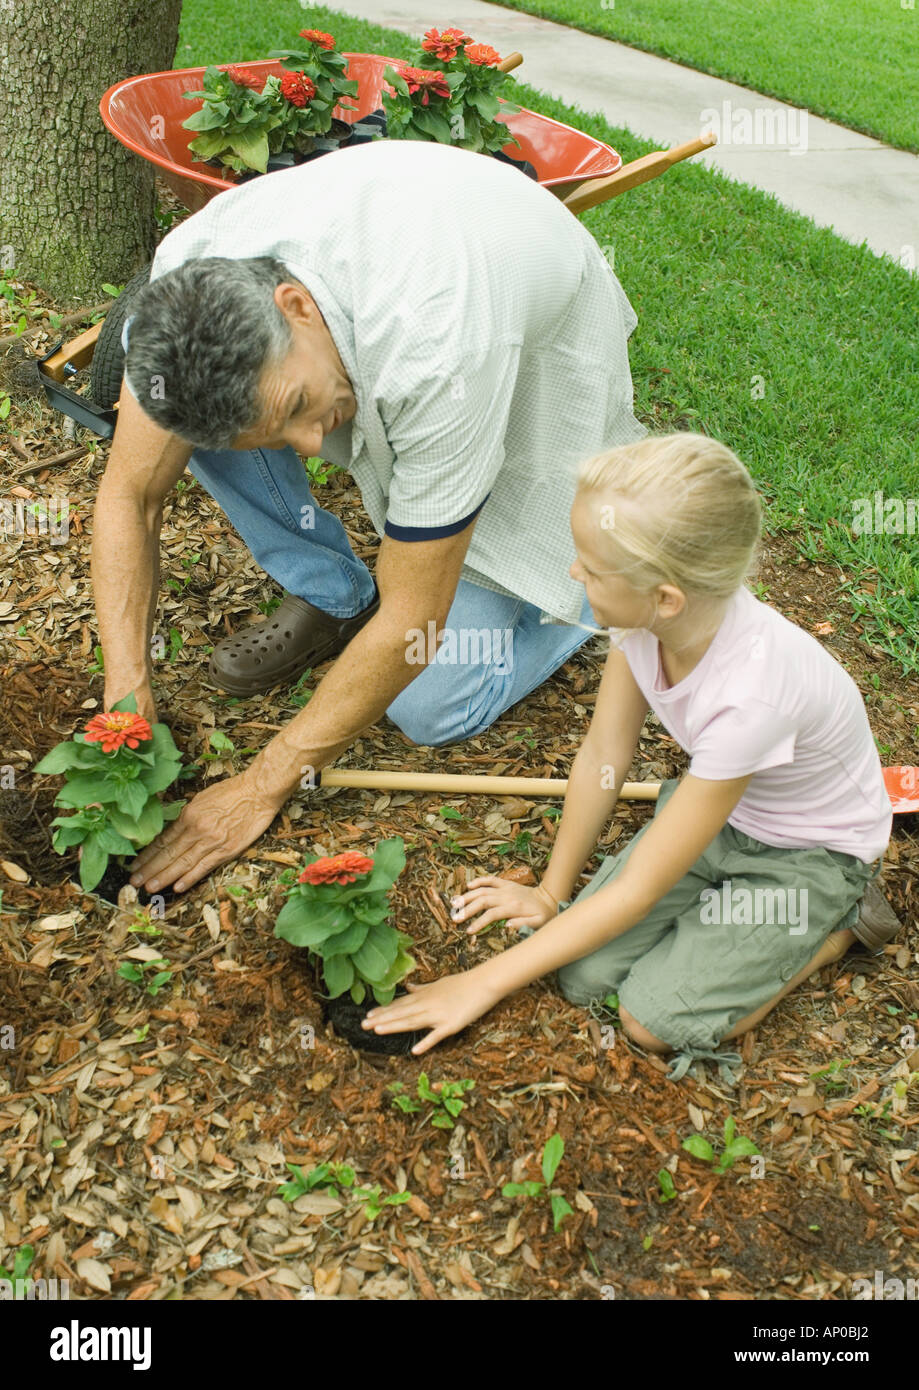 Man and girl planting flowers in yard together Stock Photo